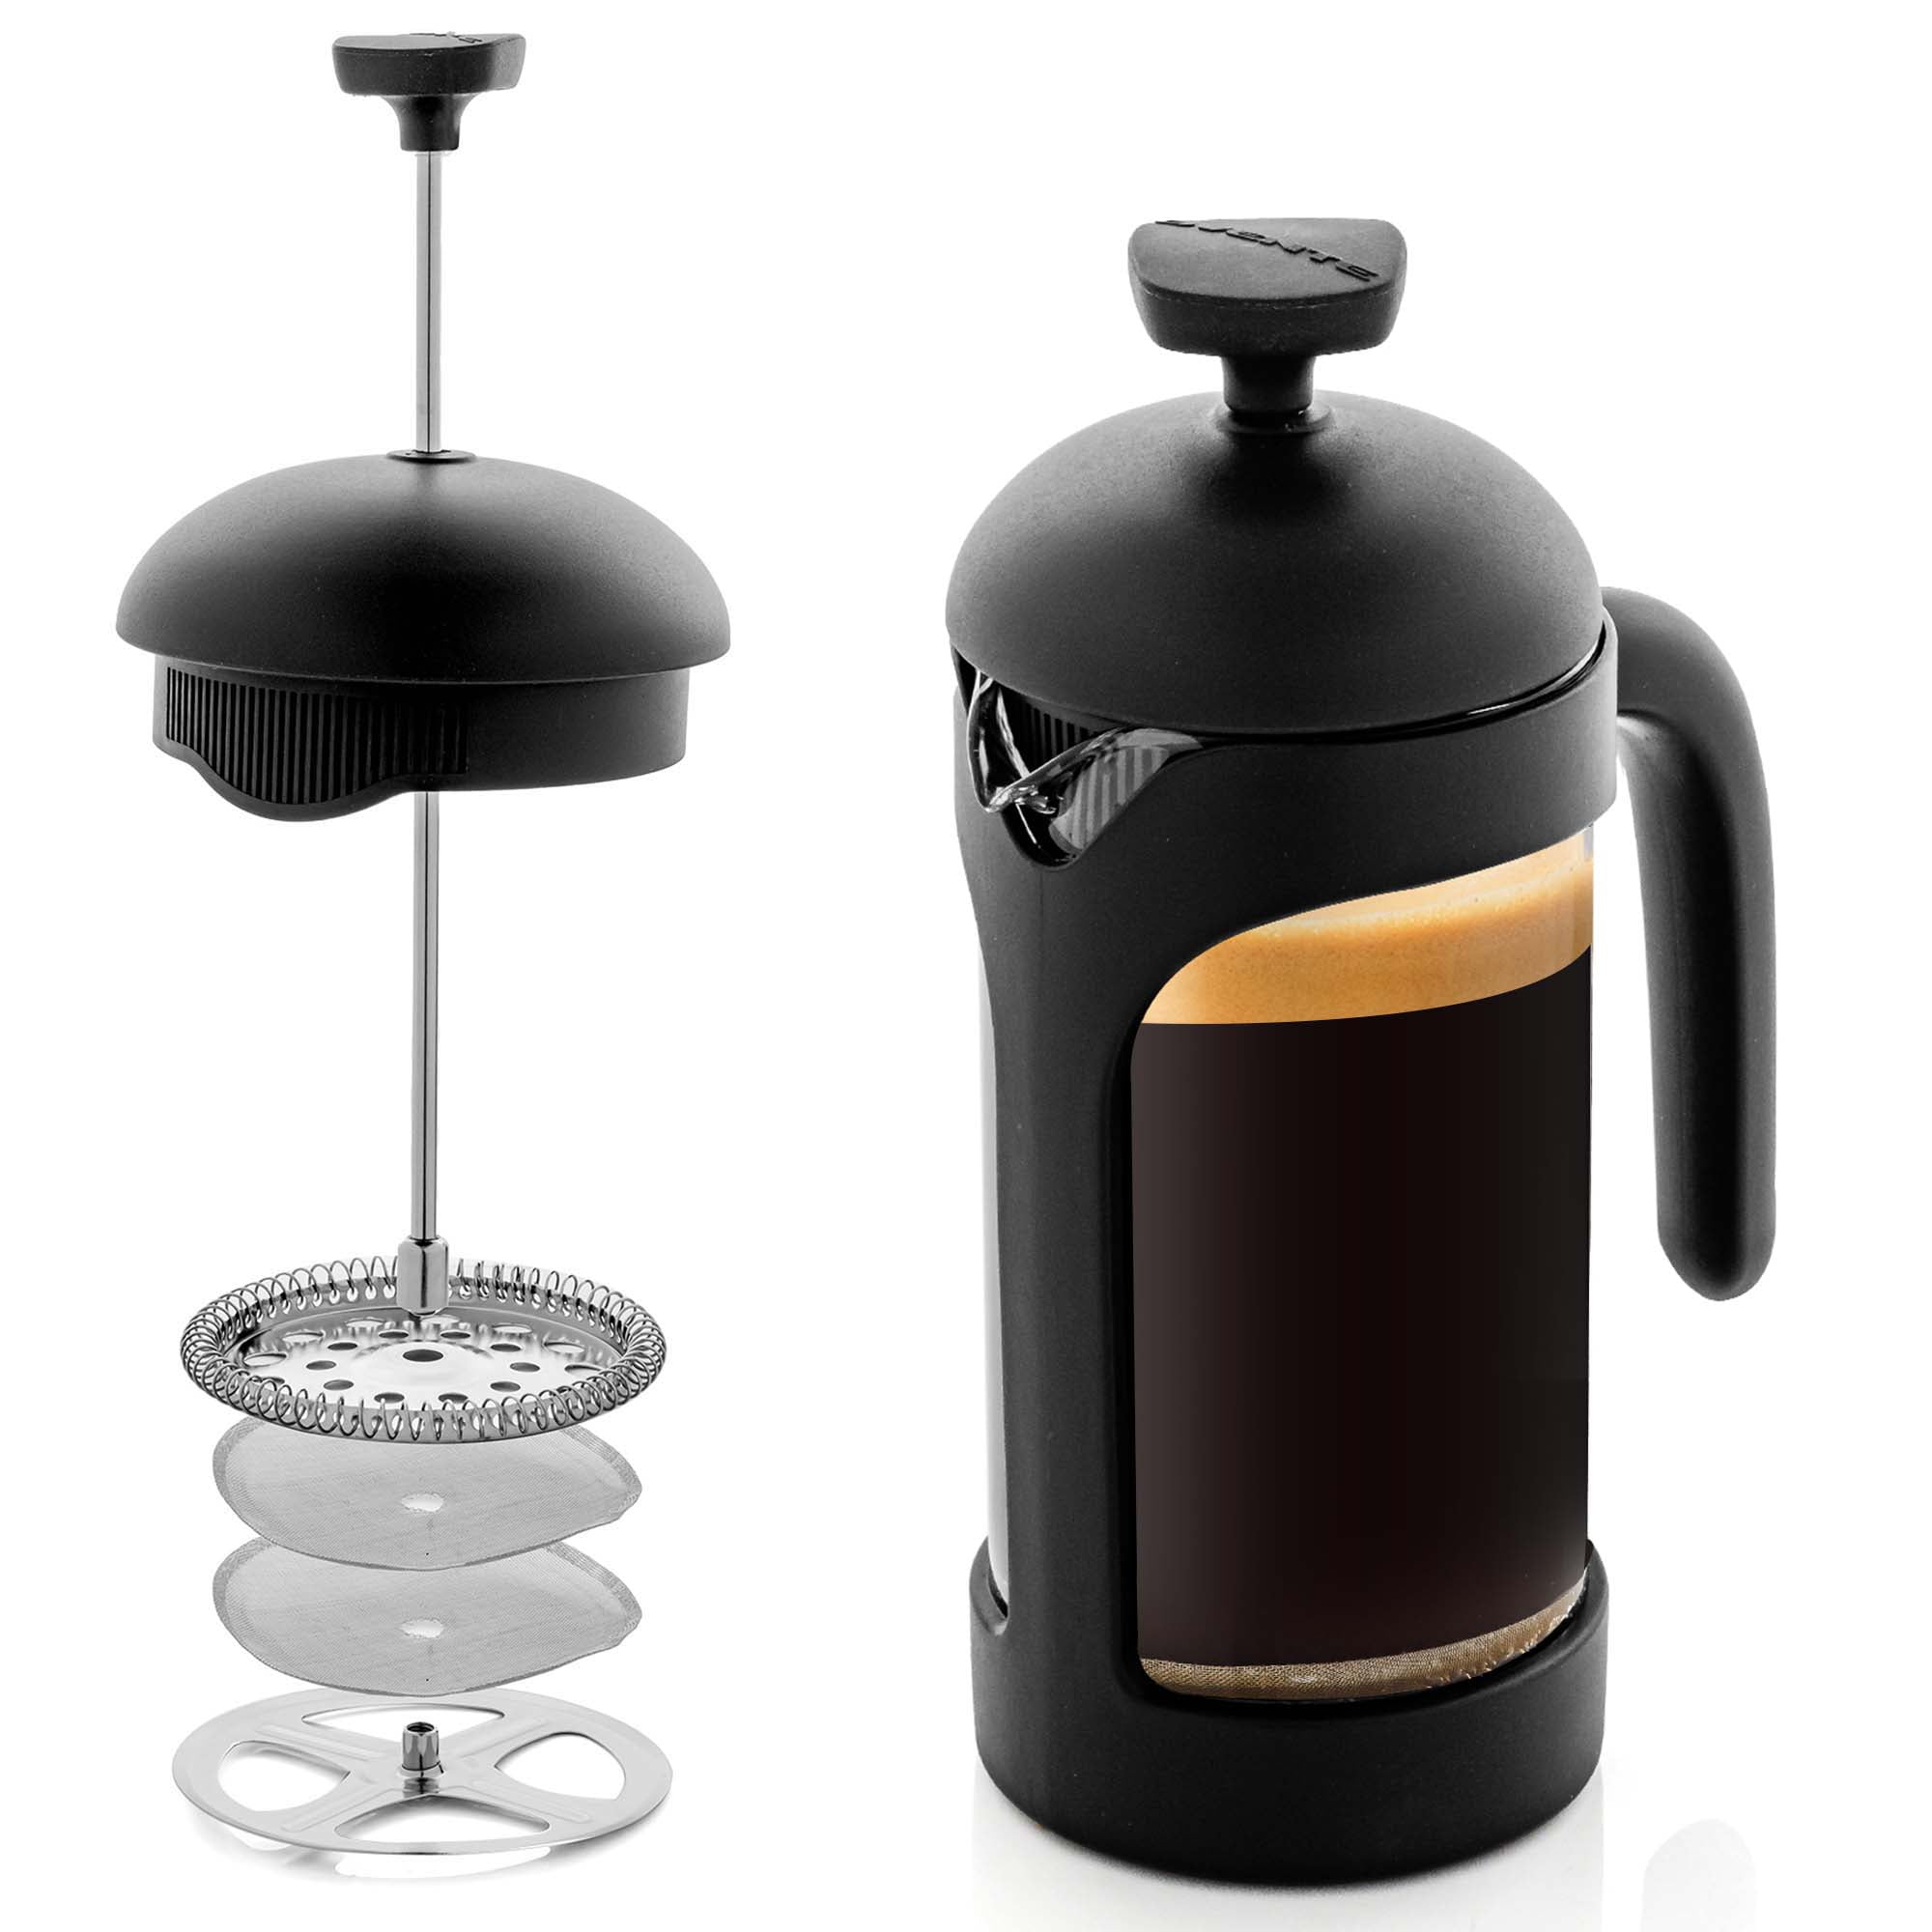 Ovente Fsl12s Series Stainless Steel French Coffee Press 12 oz Leaf